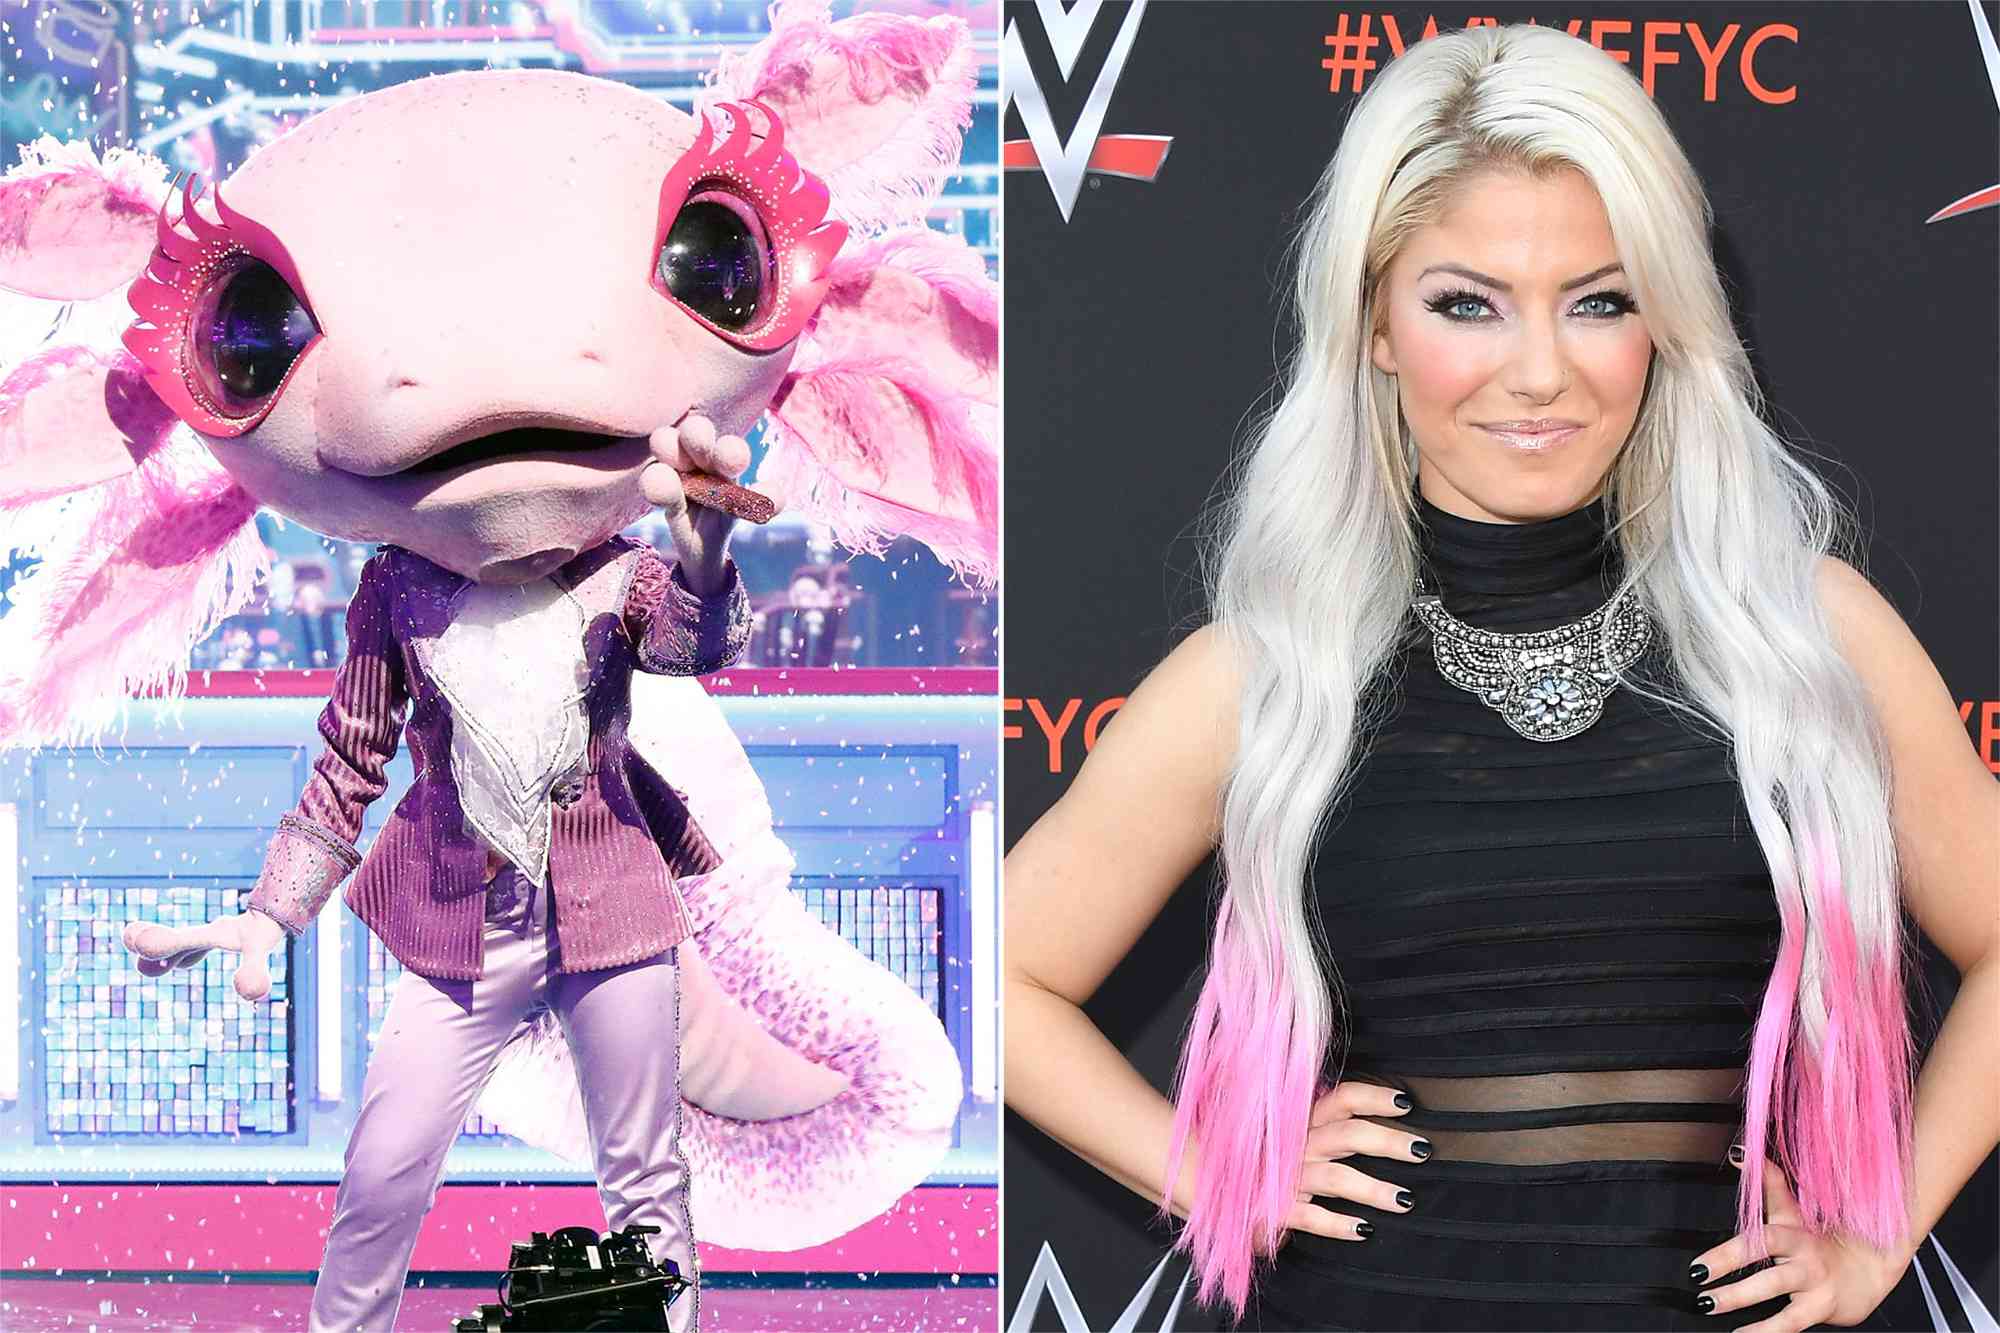 THE MASKED SINGER: Axolotl in the “Country Night” episode of THE MASKED SINGER airing Wednesday, March 22, Alexa Bliss attends WWE's First-Ever Emmy "For Your Consideration" Event at Saban Media Center on June 6, 2018 in North Hollywood, California.